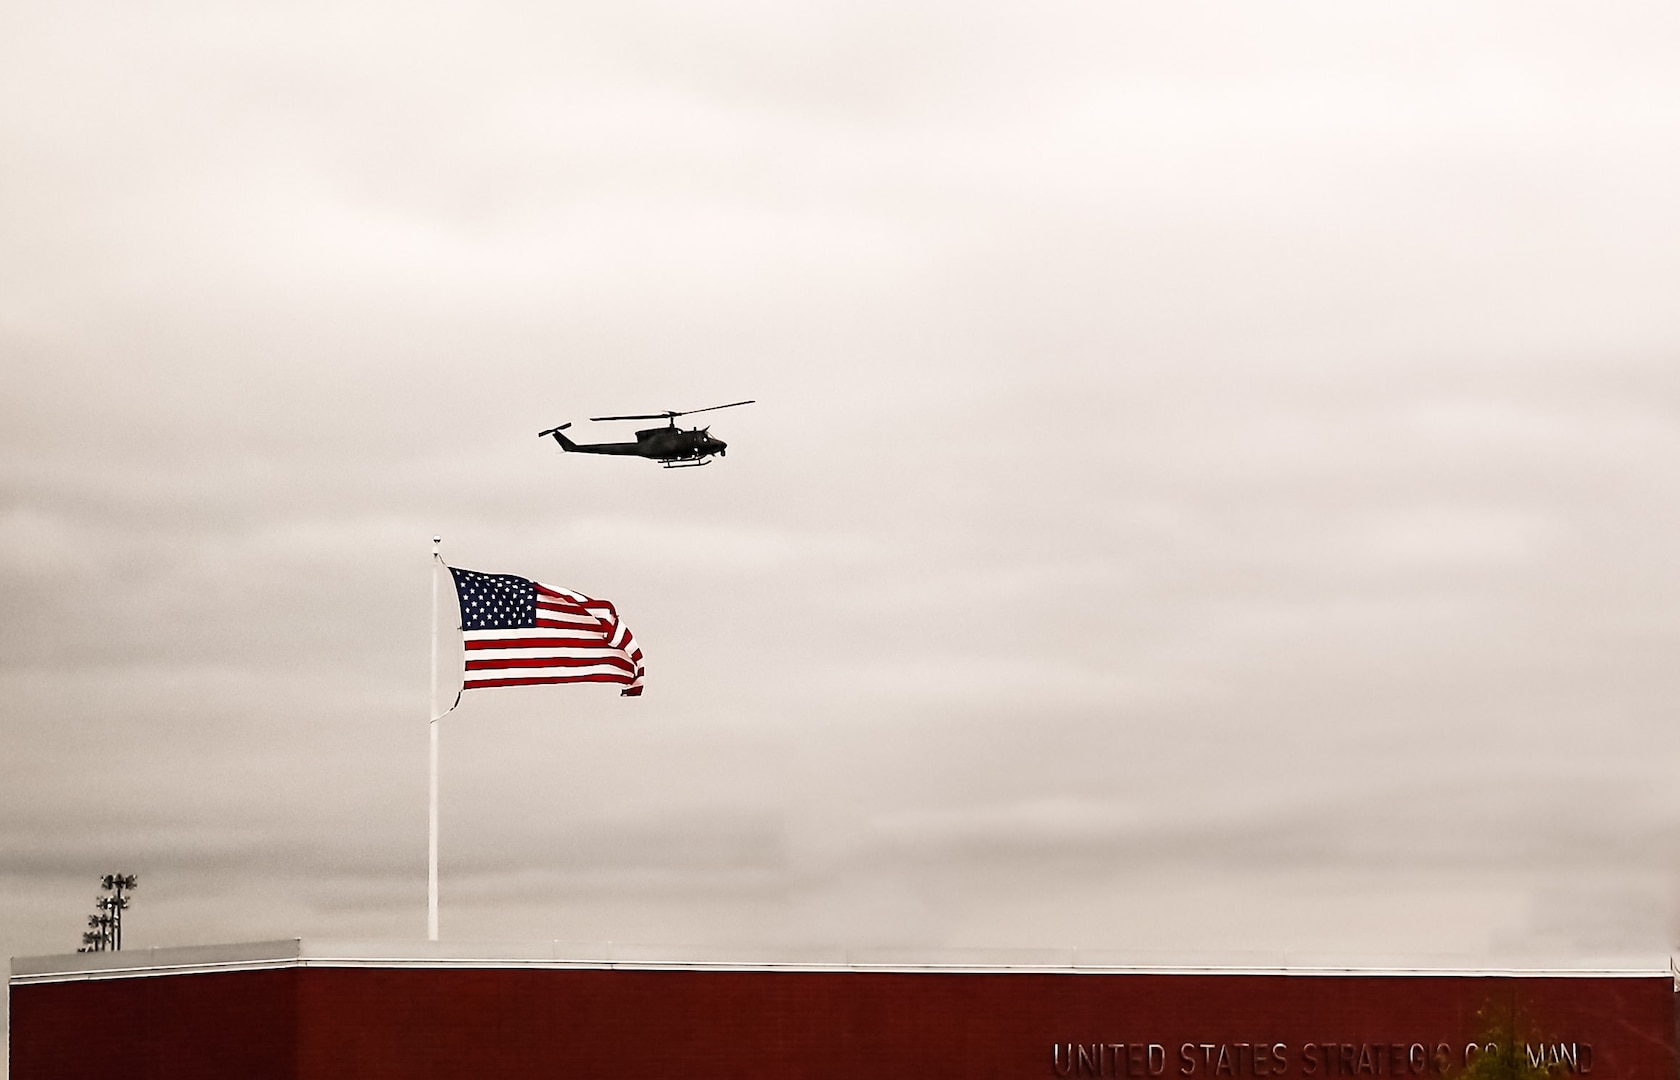 Helicopter flying near American flag